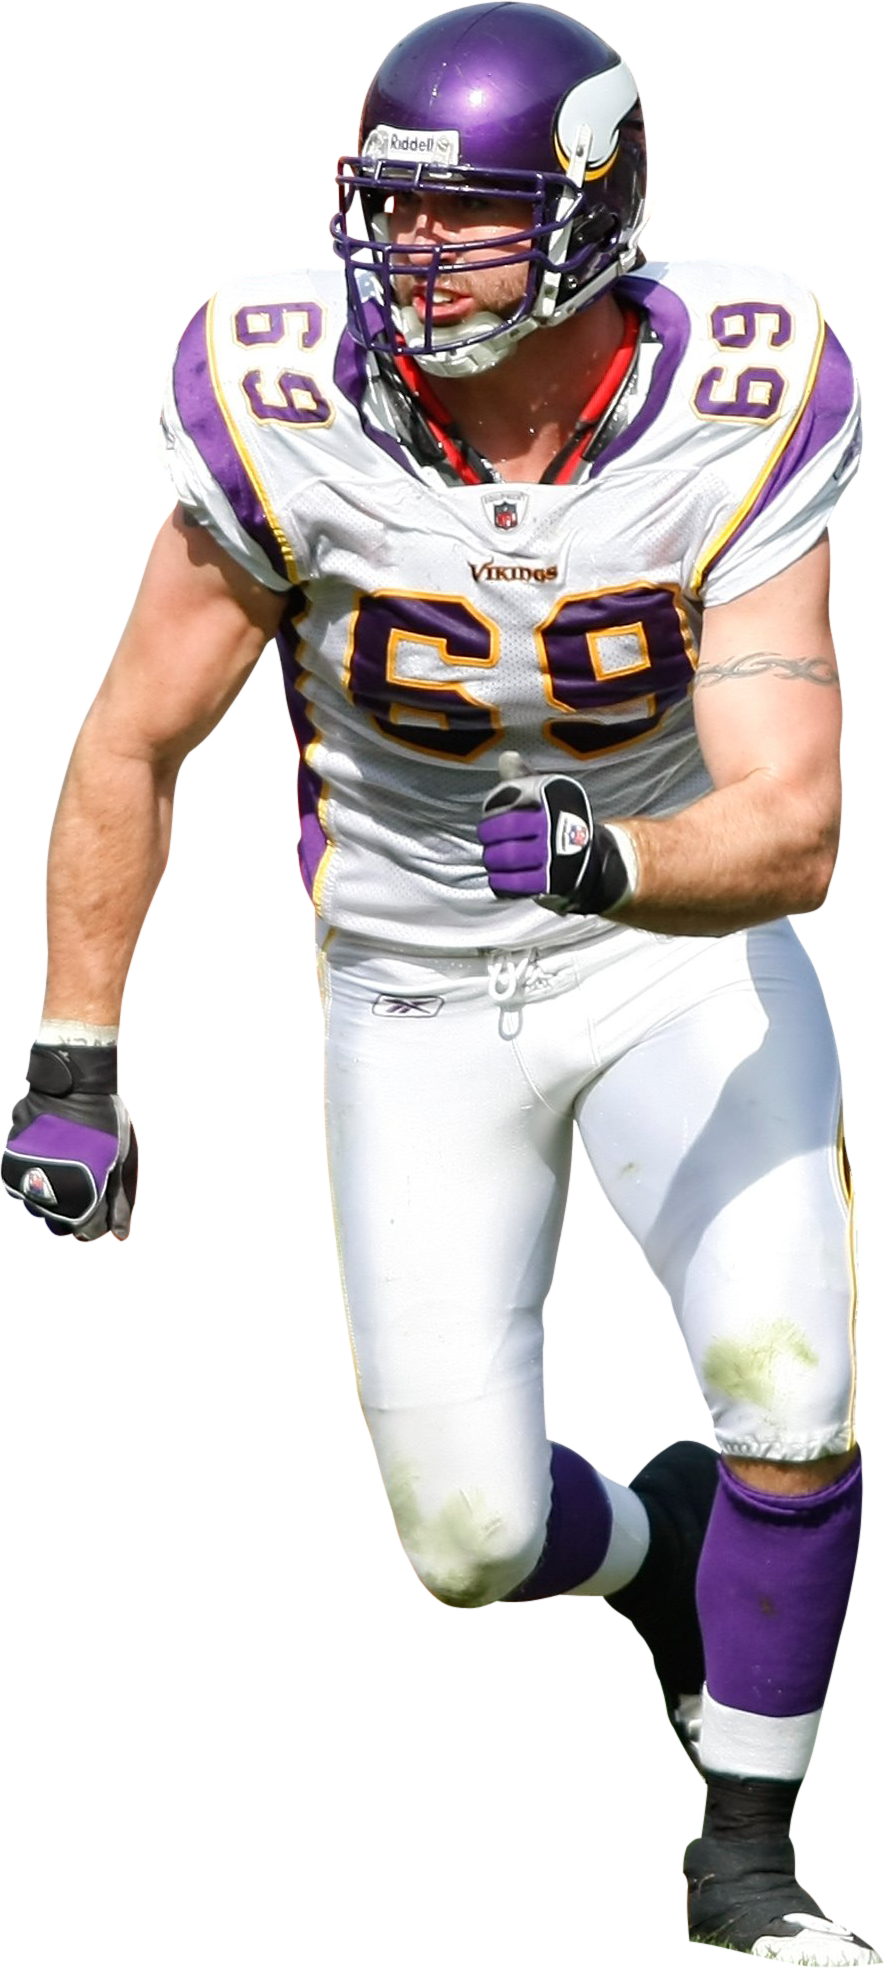 American Football Player PNG Image - PurePNG | Free transparent CC0 PNG